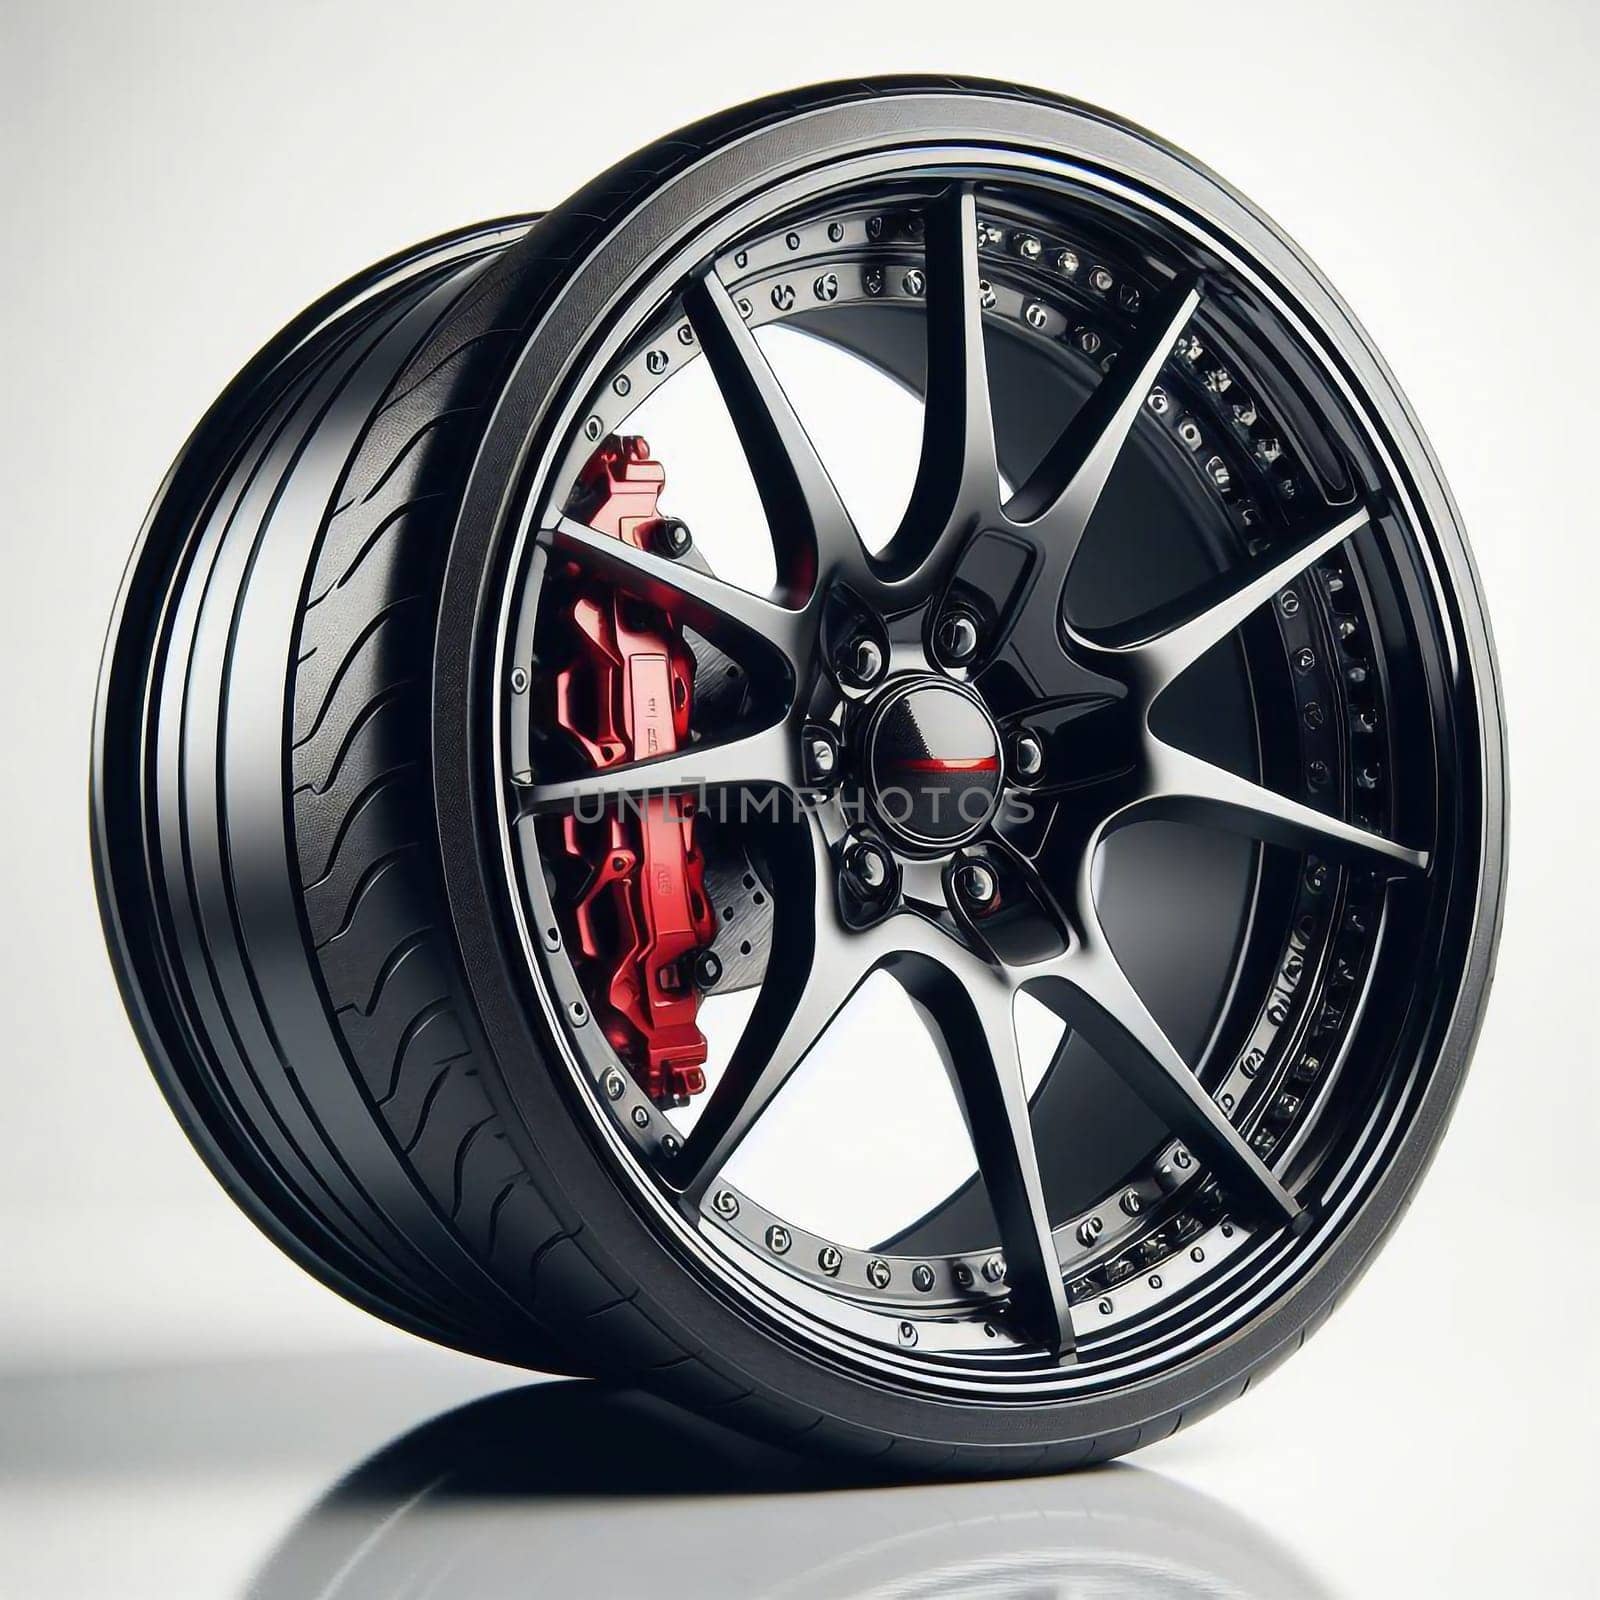 Sports car wheel for automobile companies by architectphd